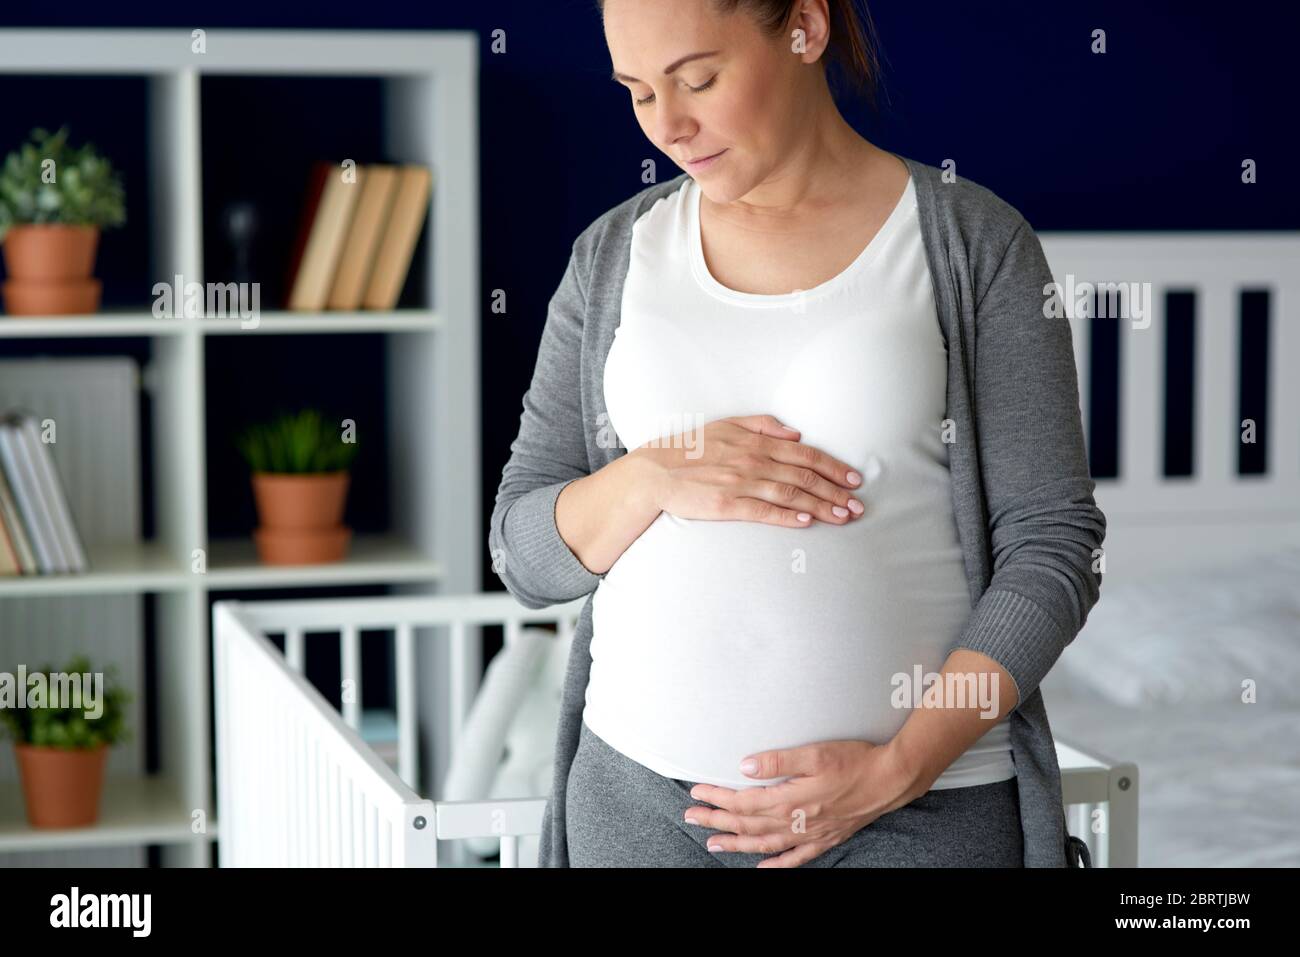 Vertical image of pregnant woman expecting a baby Stock Photo